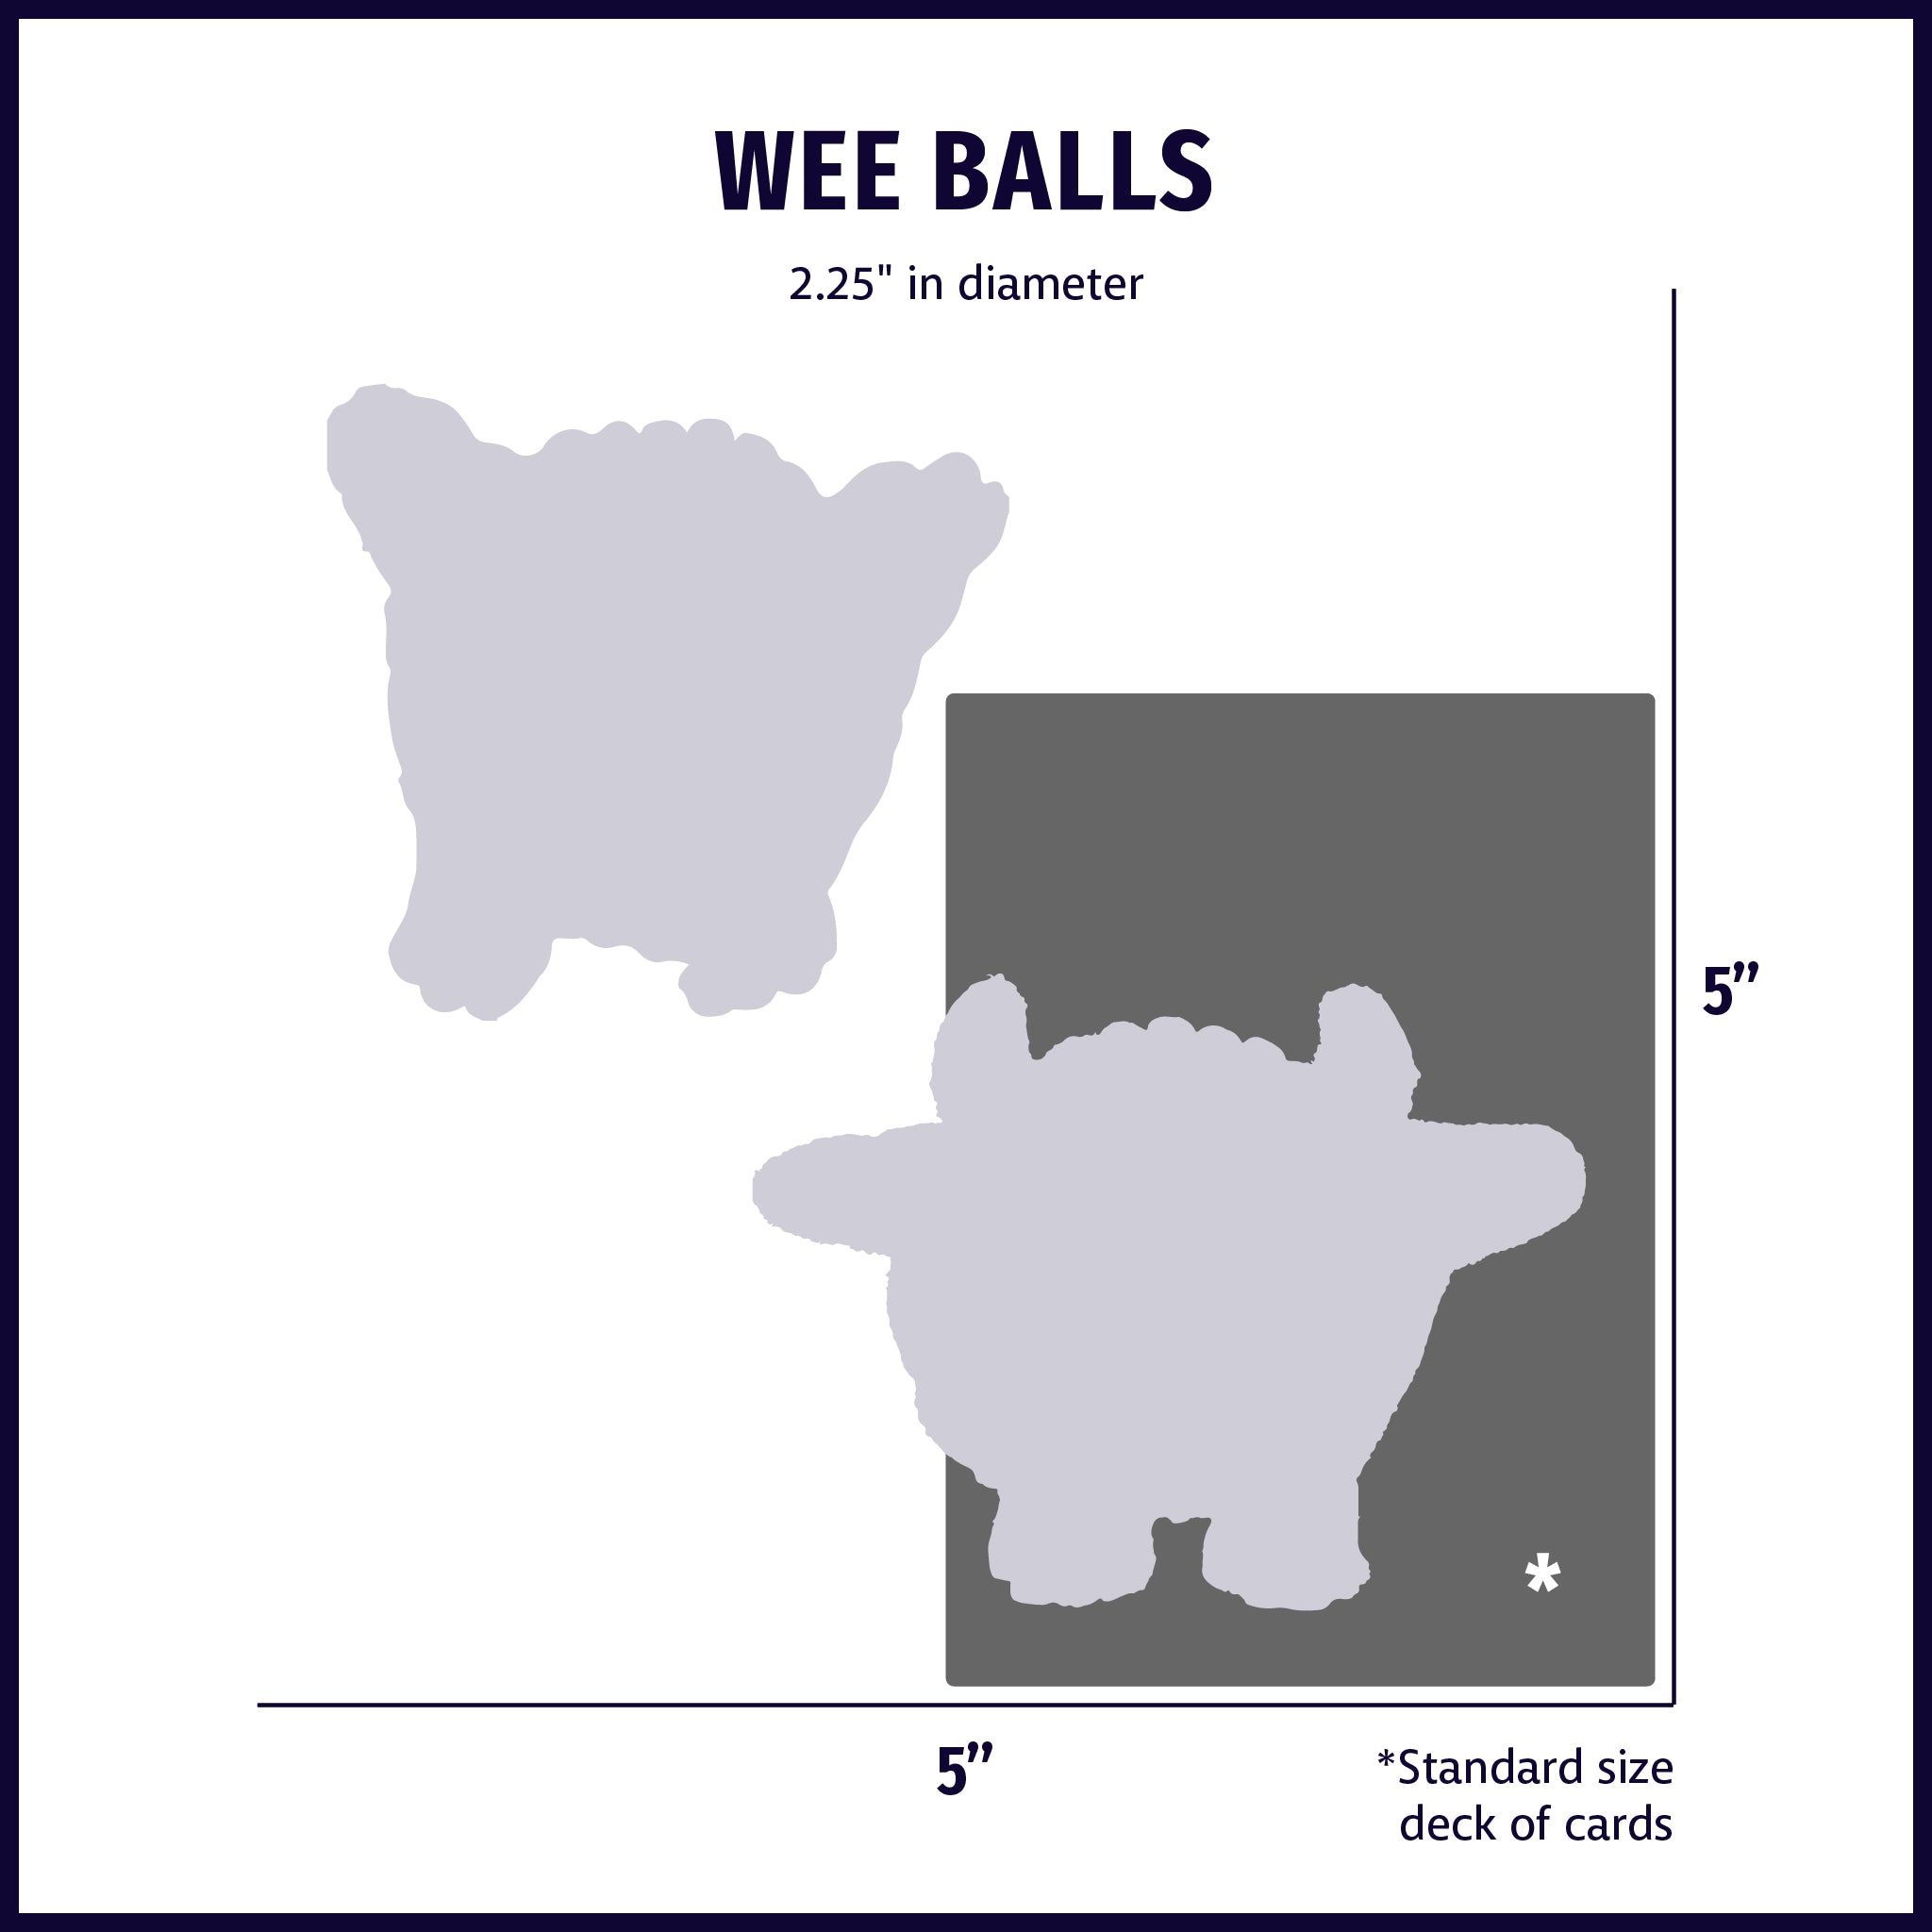 Size chart displaying Wee Huggle® Balls plush dog toys silhouettes with approximate dimensions compared to standard size deck of cards.